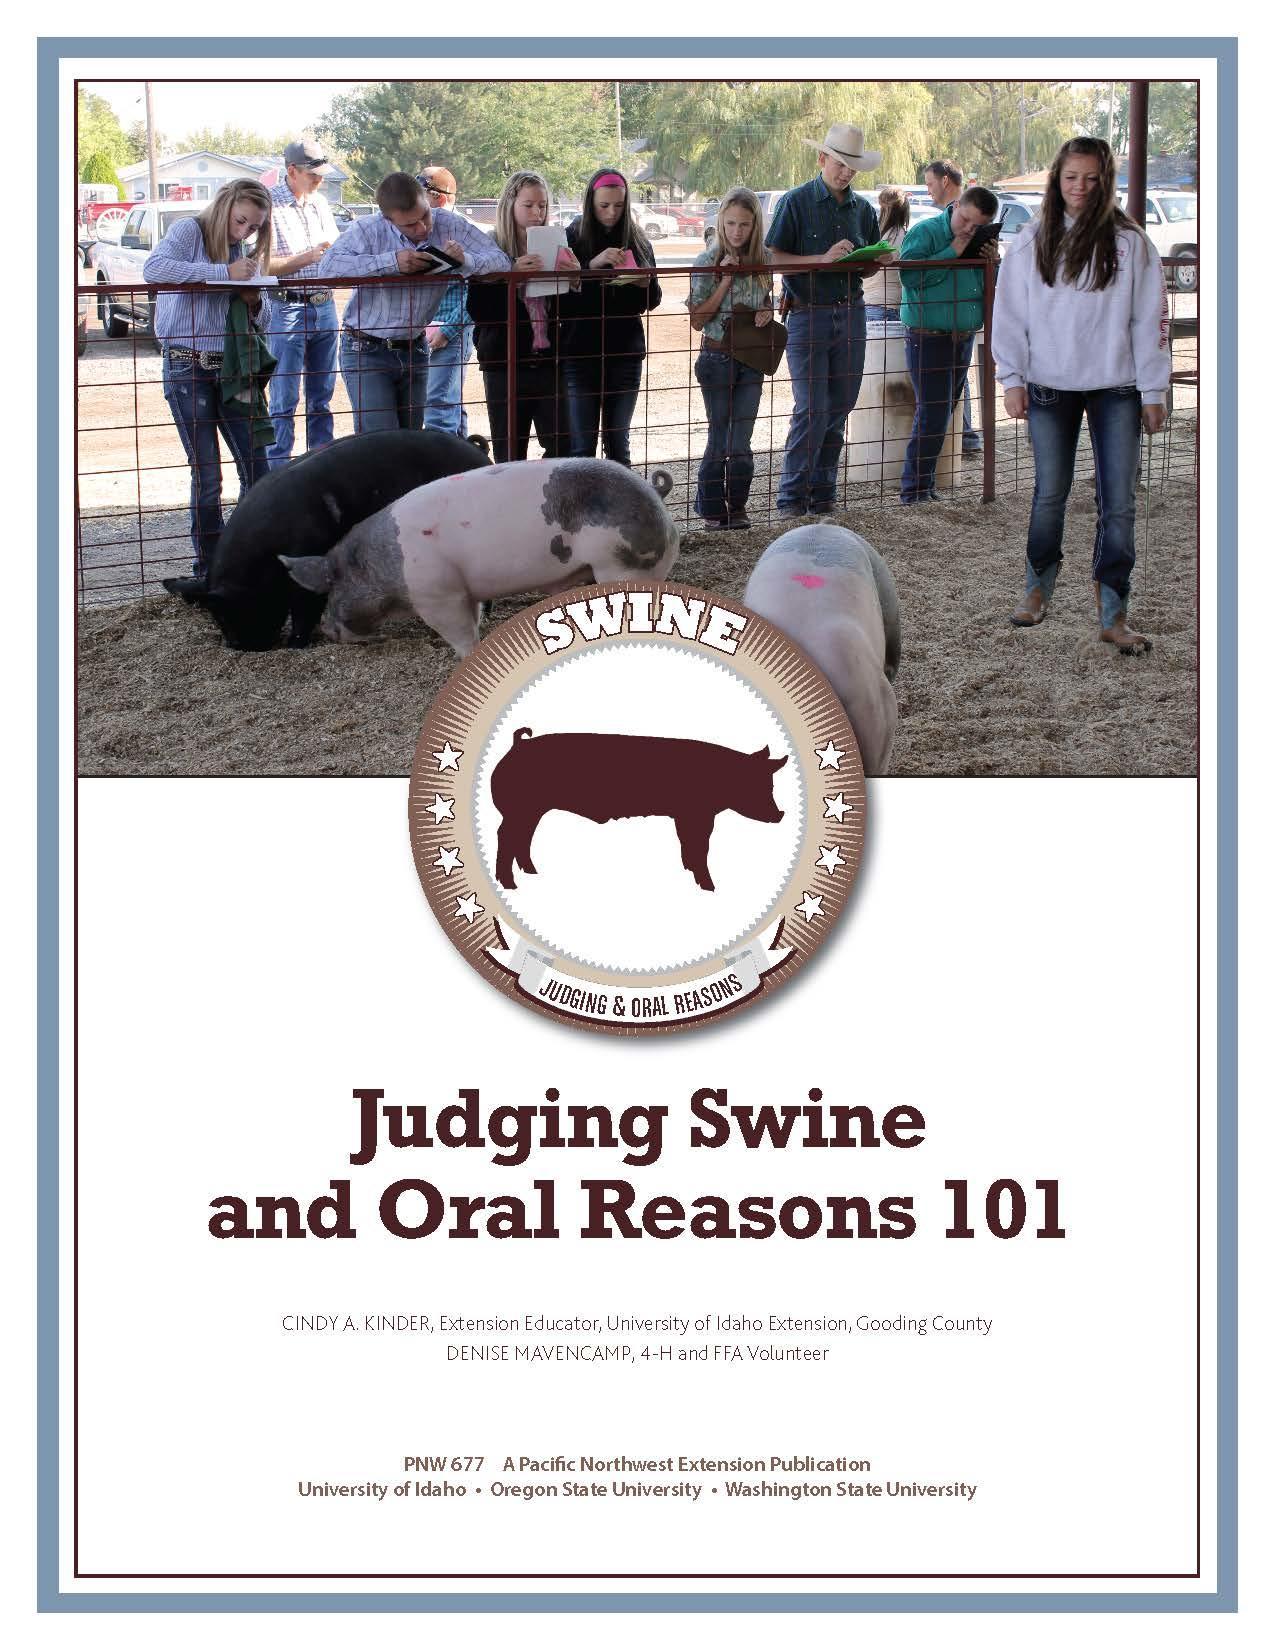 Cover image of "Judging Swine and Oral Reasons 101"